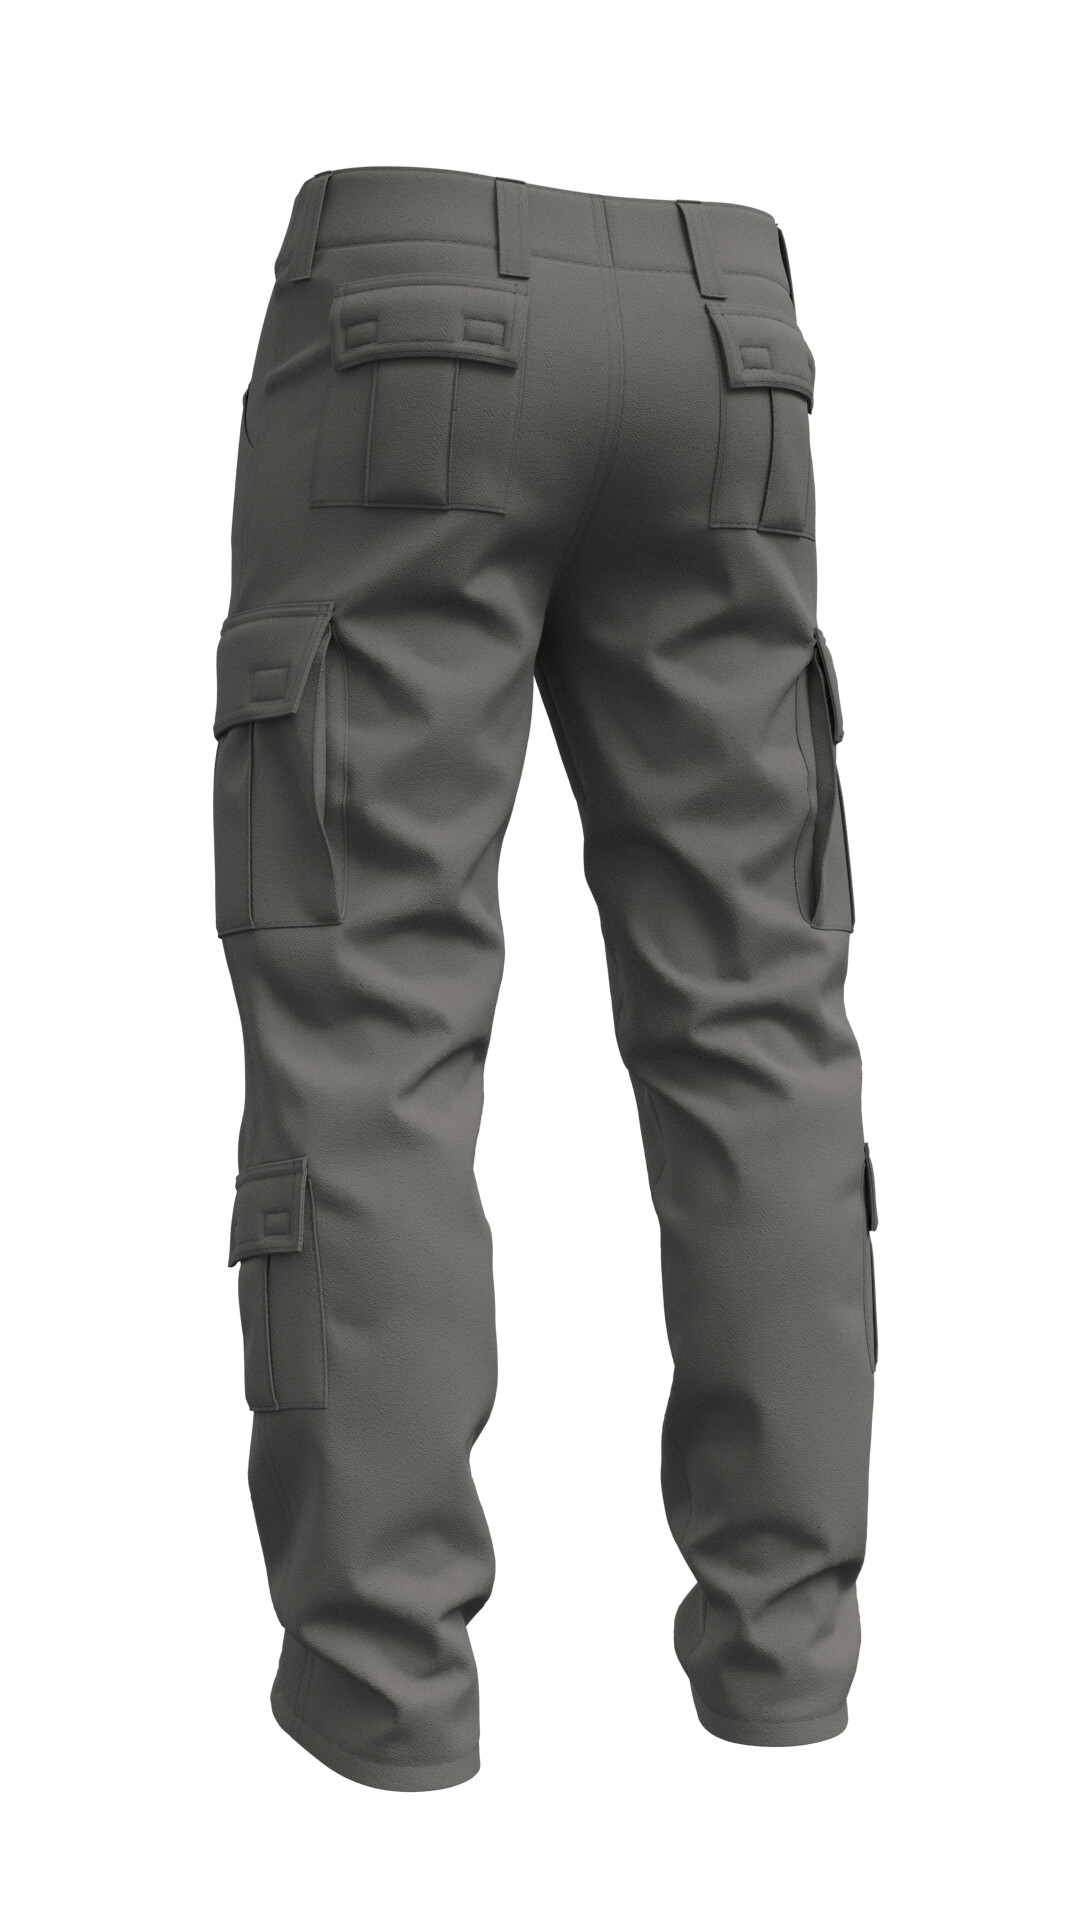 Cargo Pants Technical Fashion Illustration Green Design Jeans Pants Fashion  Flat Technical Drawing Template Pockets Front And Back View White Women Men  Unisex Cad Mockup Set Stock Illustration - Download Image Now -